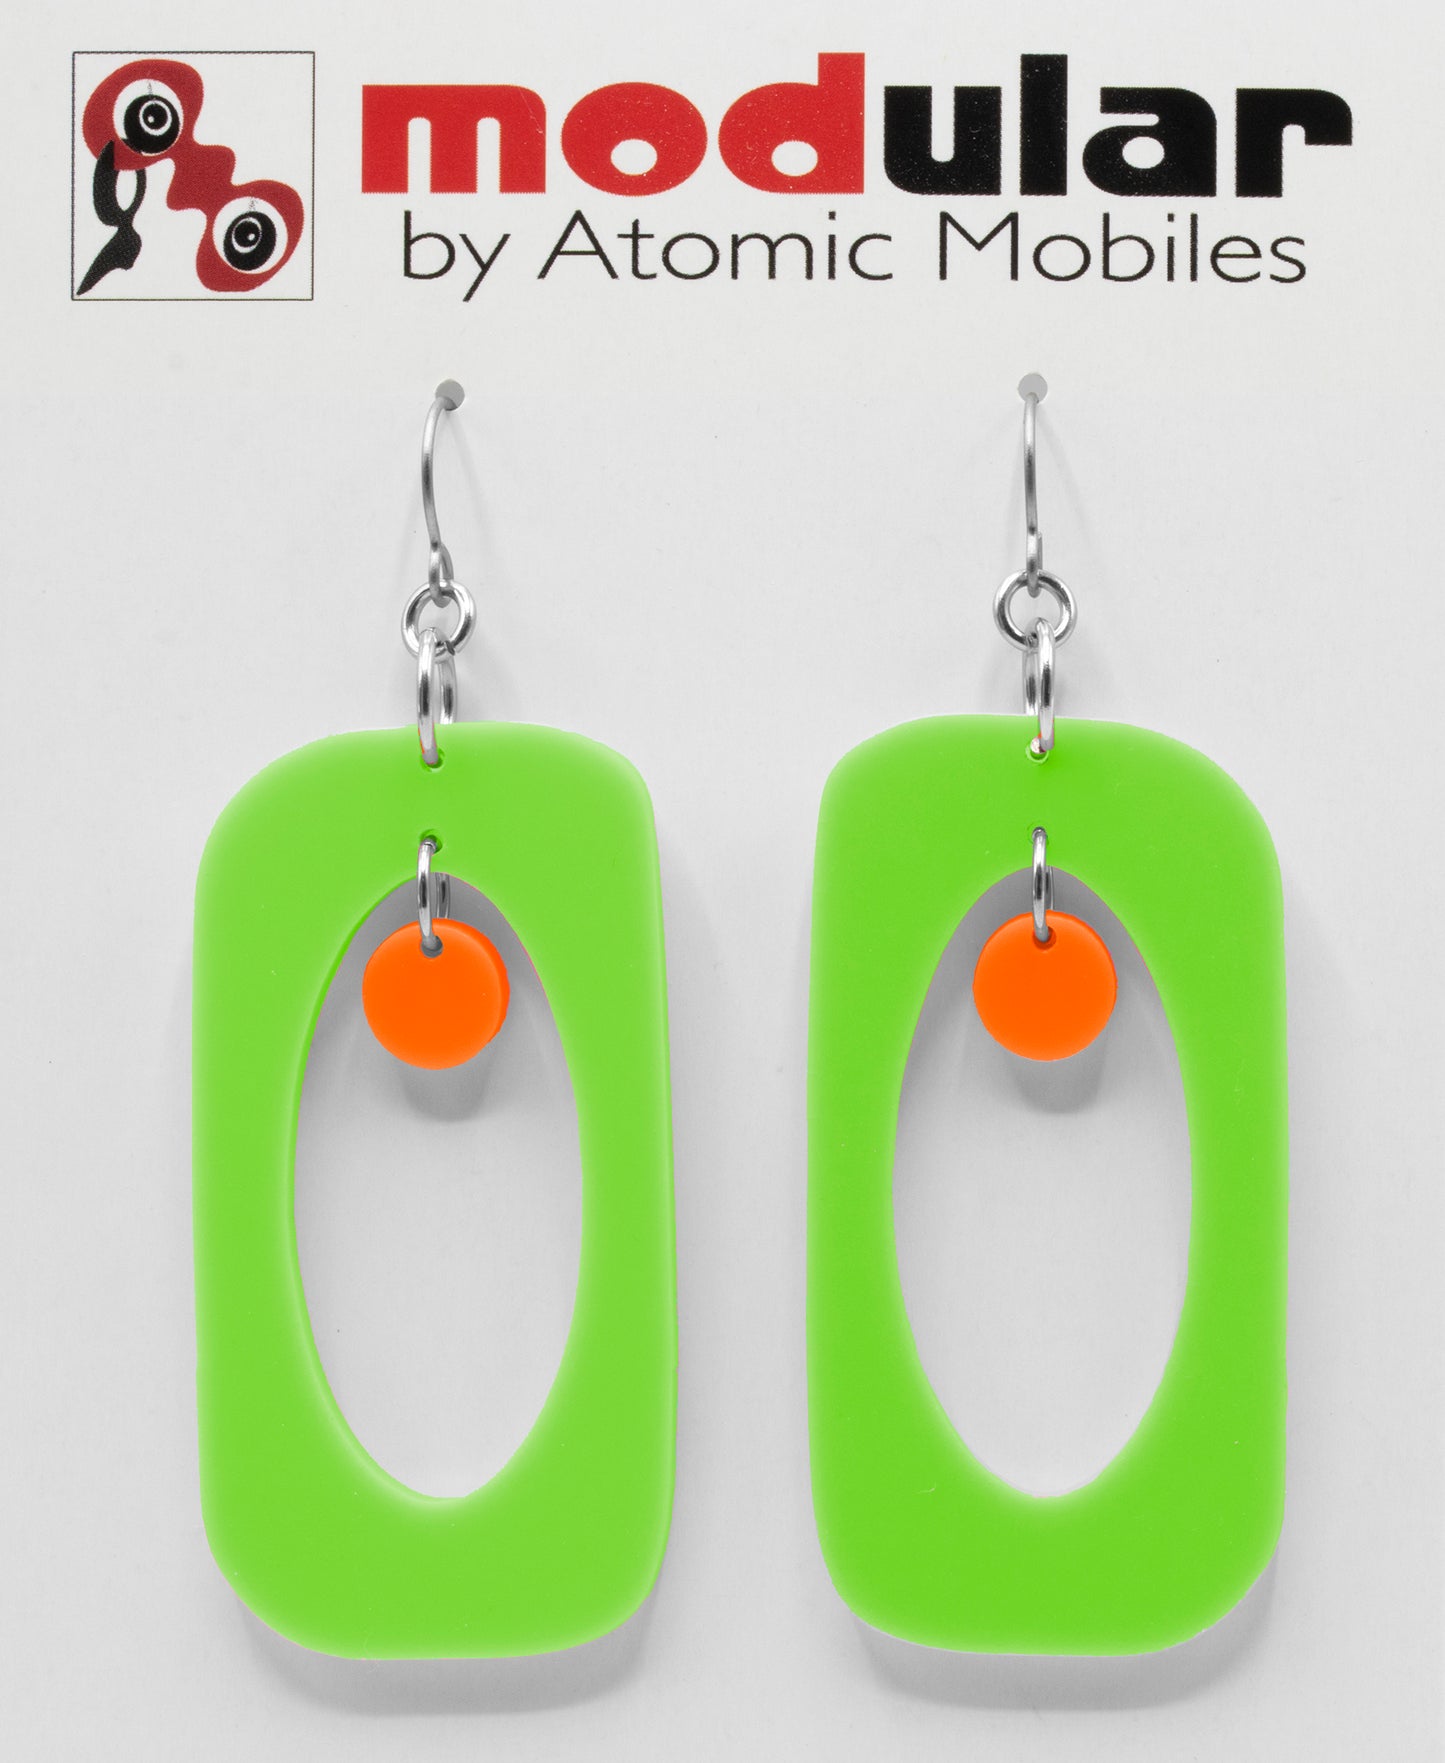 MODular Earrings - Beatnik Boho Statement Earrings in Lime and Orange - Palm Springs Colors - by AtomicMobiles.com - retro era inspired mod handmade jewelry